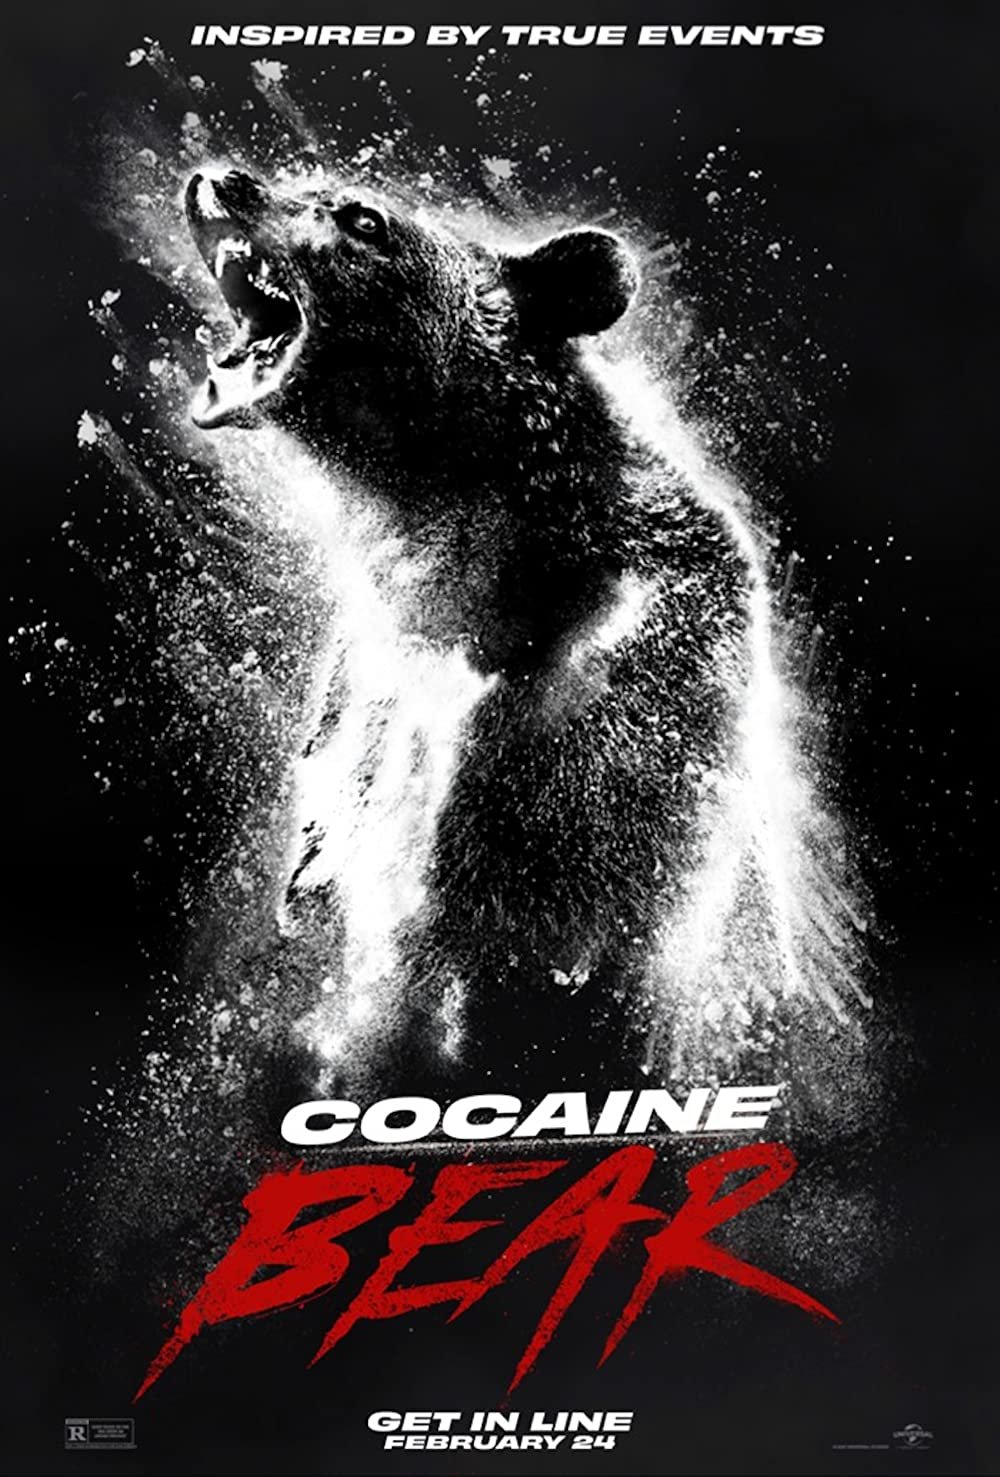 Cocaine Bear images © Universal Pictures